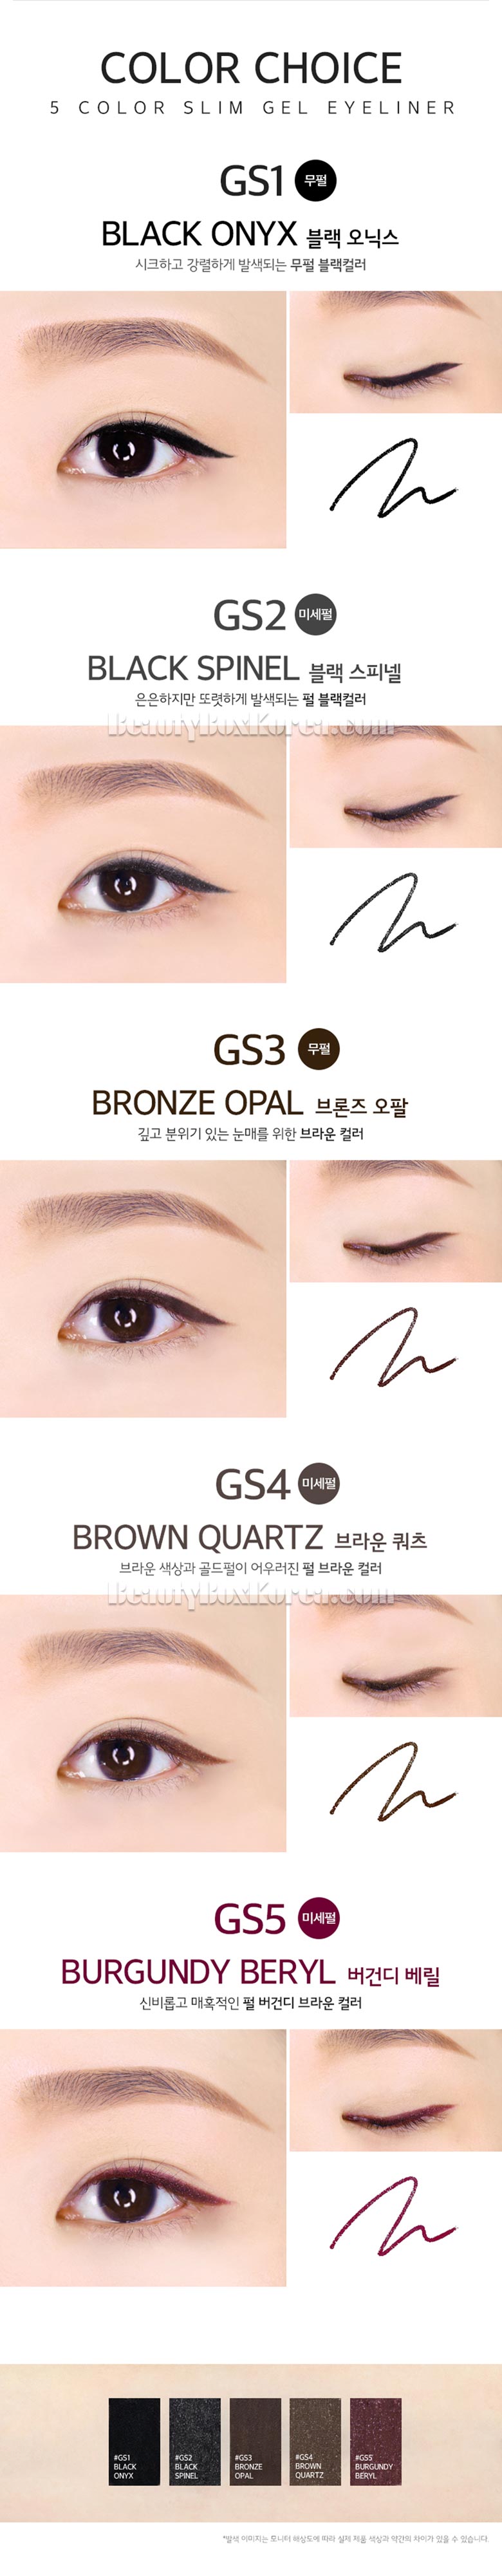 MERZY The First Slim Gel Eyeliner 0.05 | Best Price and Fast Shipping from  Beauty Box Korea